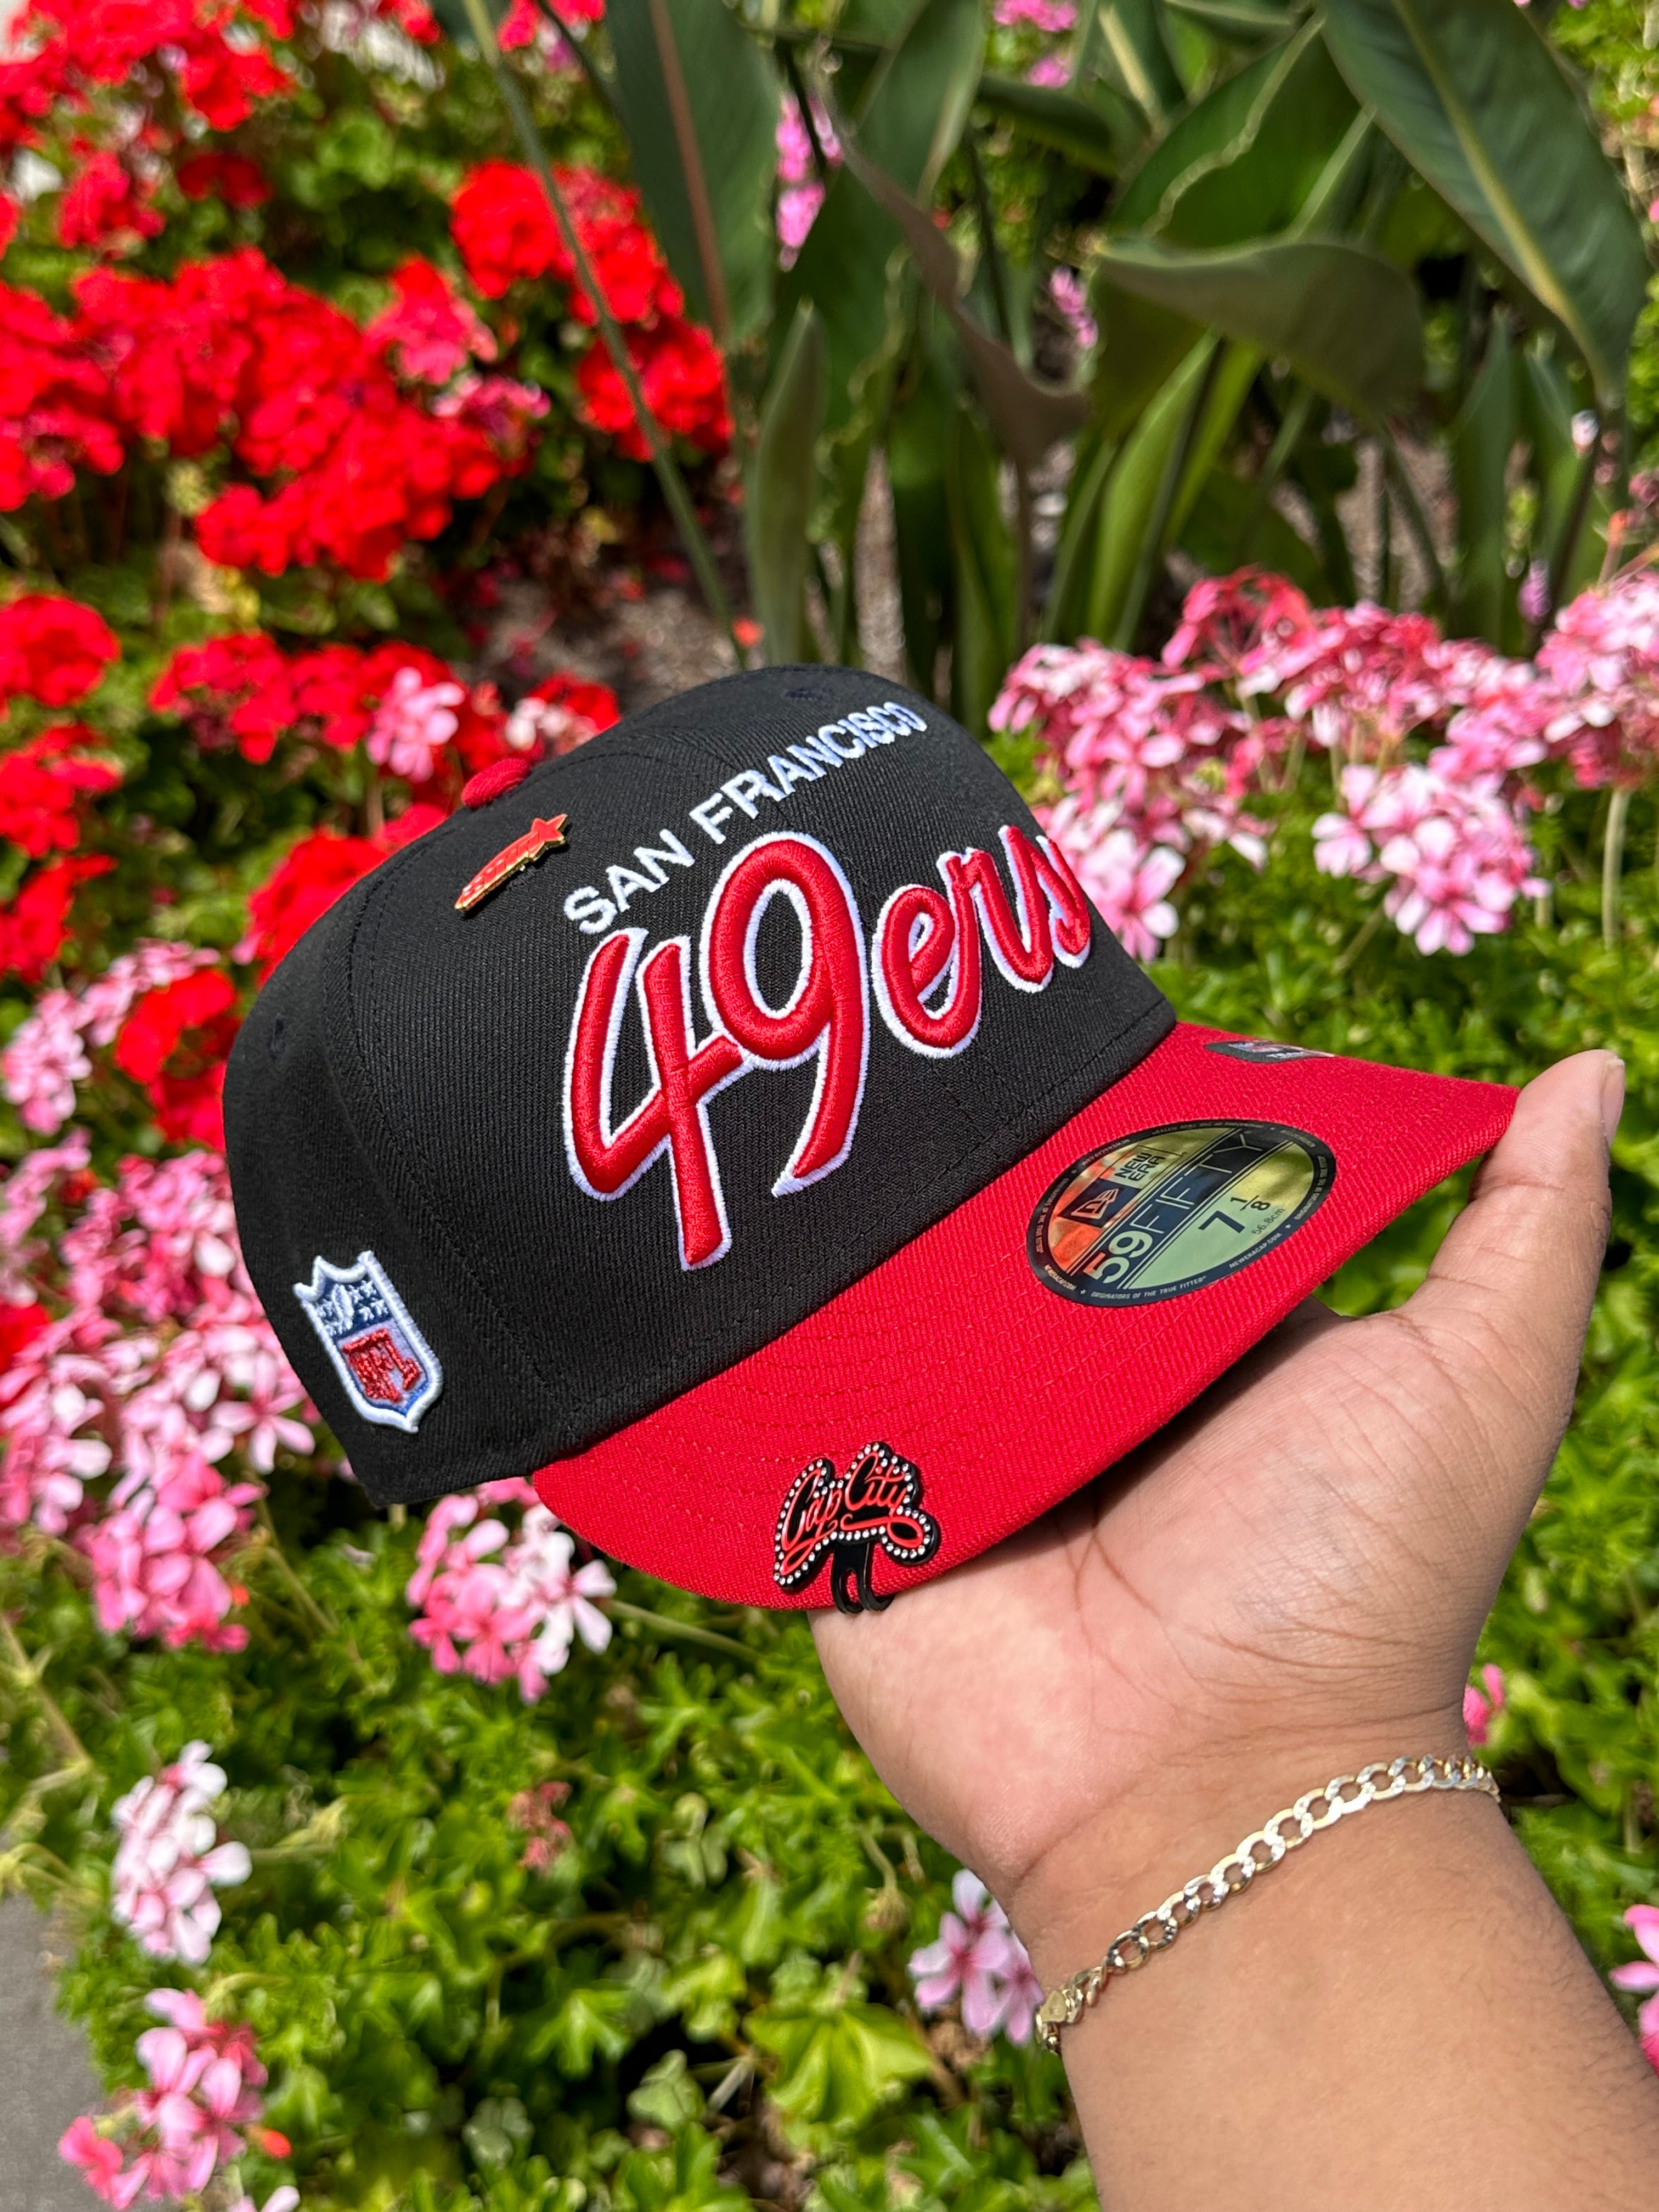 NEW ERA EXCLUSIVE 59FIFTY BLACK/RED SAN FRANSICO "49ERS" SCRIPT W/ NFL LOGO SIDE PATCH